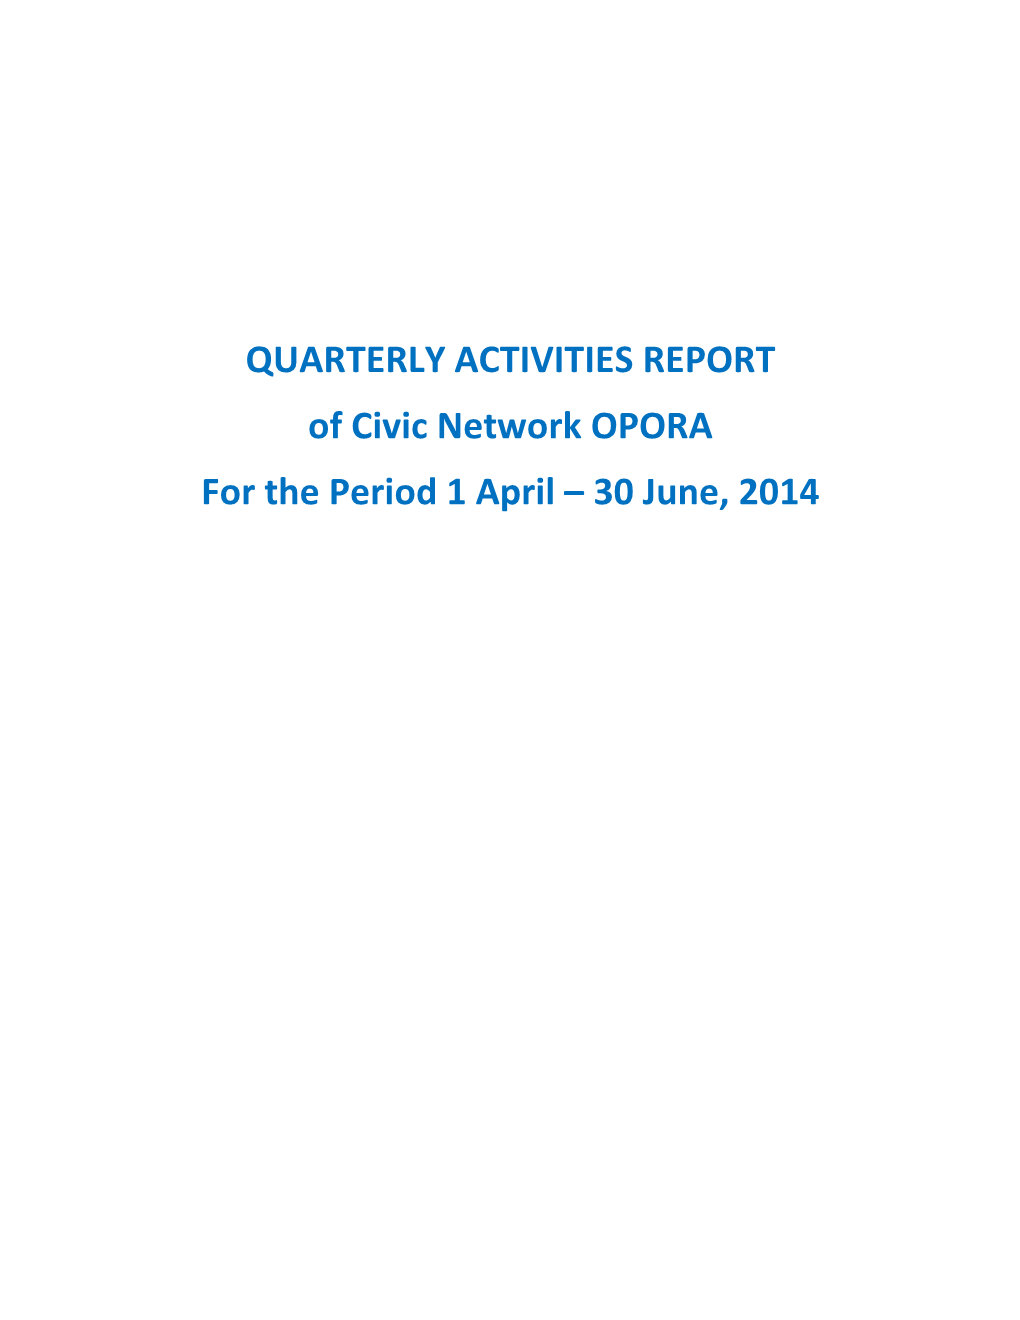 QUARTERLY ACTIVITIES REPORT of Civic Network OPORA for the Period 1 April – 30 June, 2014